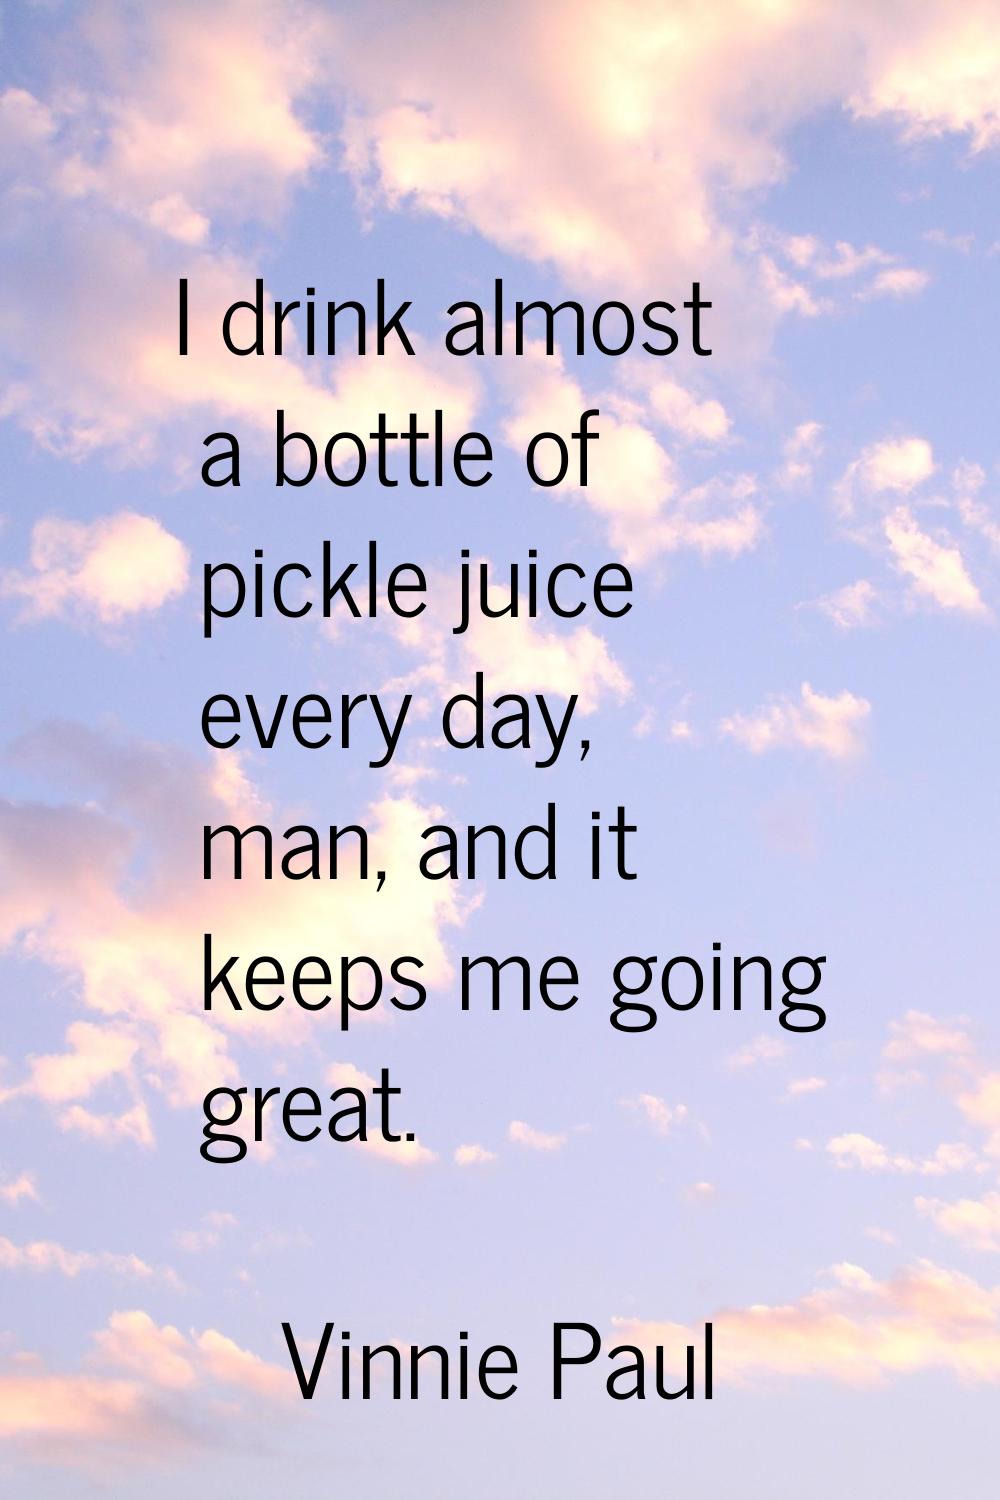 I drink almost a bottle of pickle juice every day, man, and it keeps me going great.